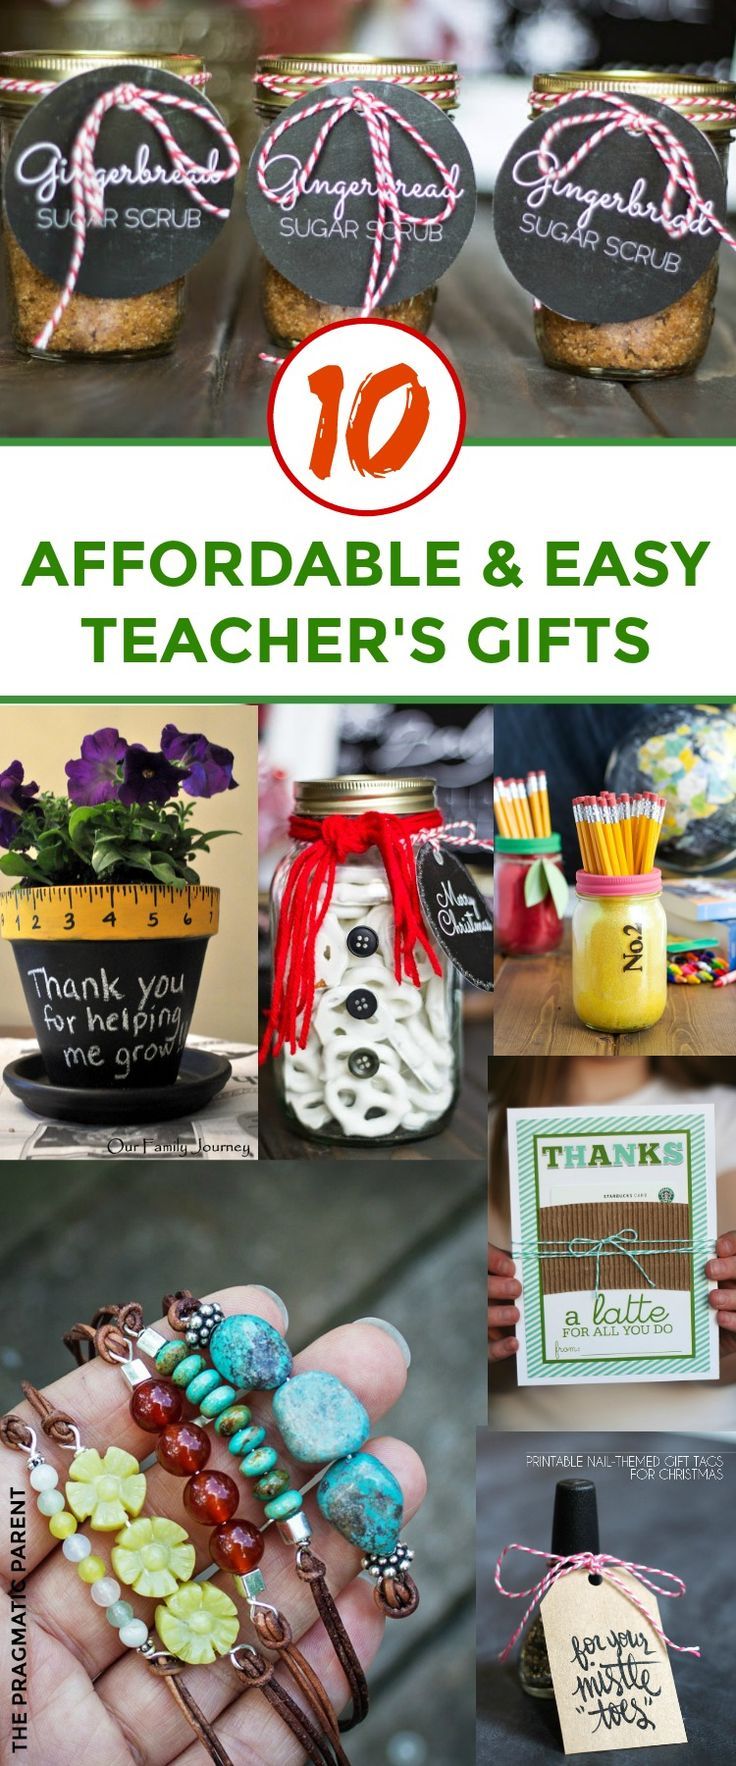 10 Easy & Affordable Teacher's Gifts for Christmas. Inexpensive Teacher's Gifts ...